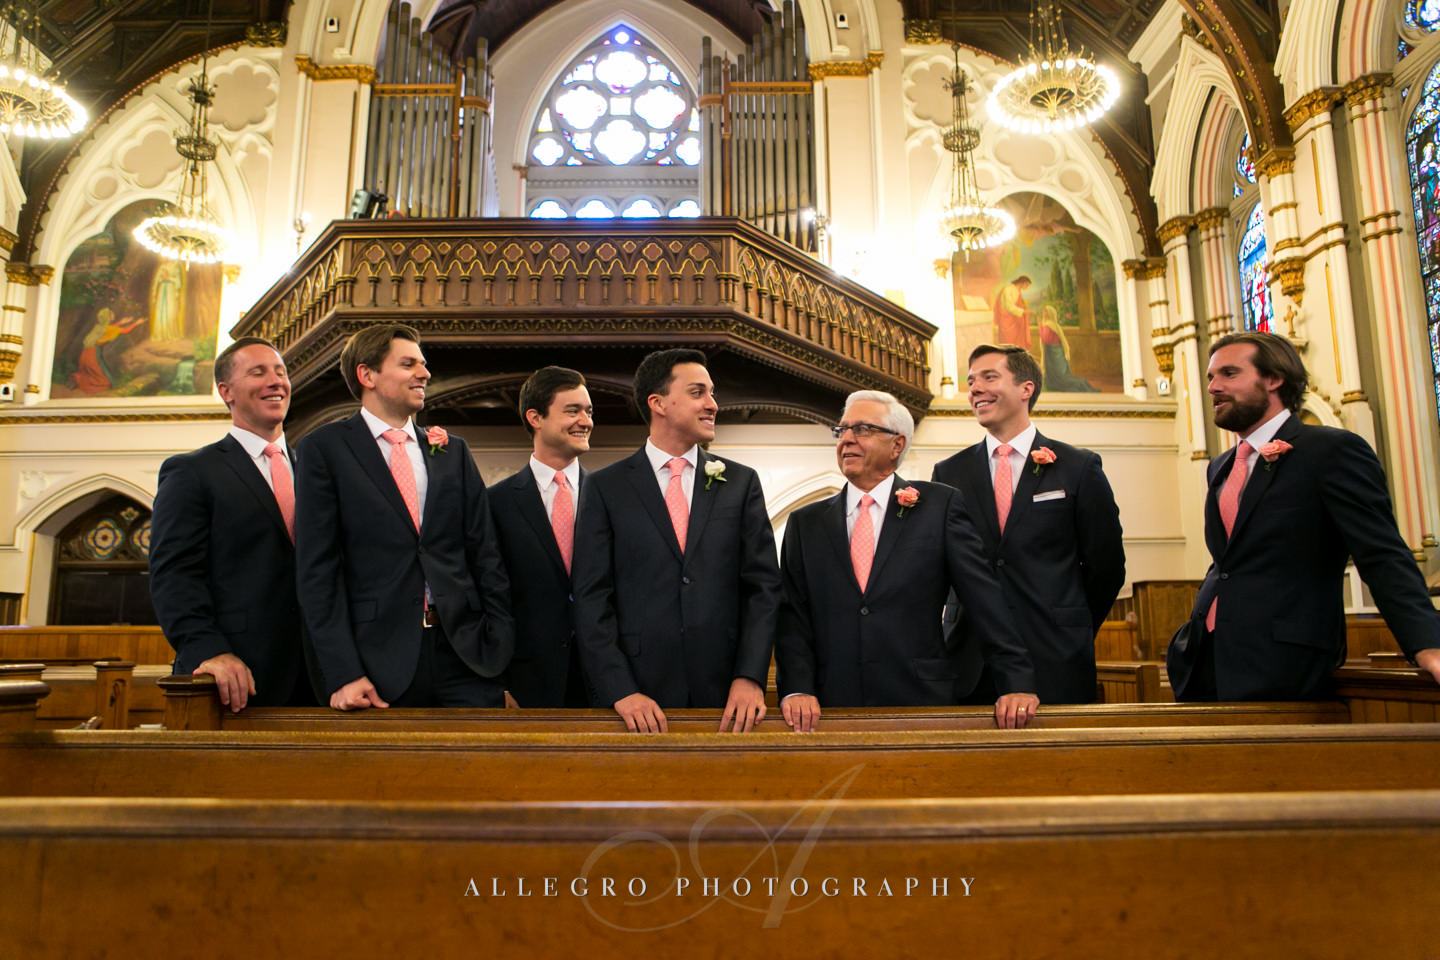 groomsmen portrait at church - photo by Allegro Photography